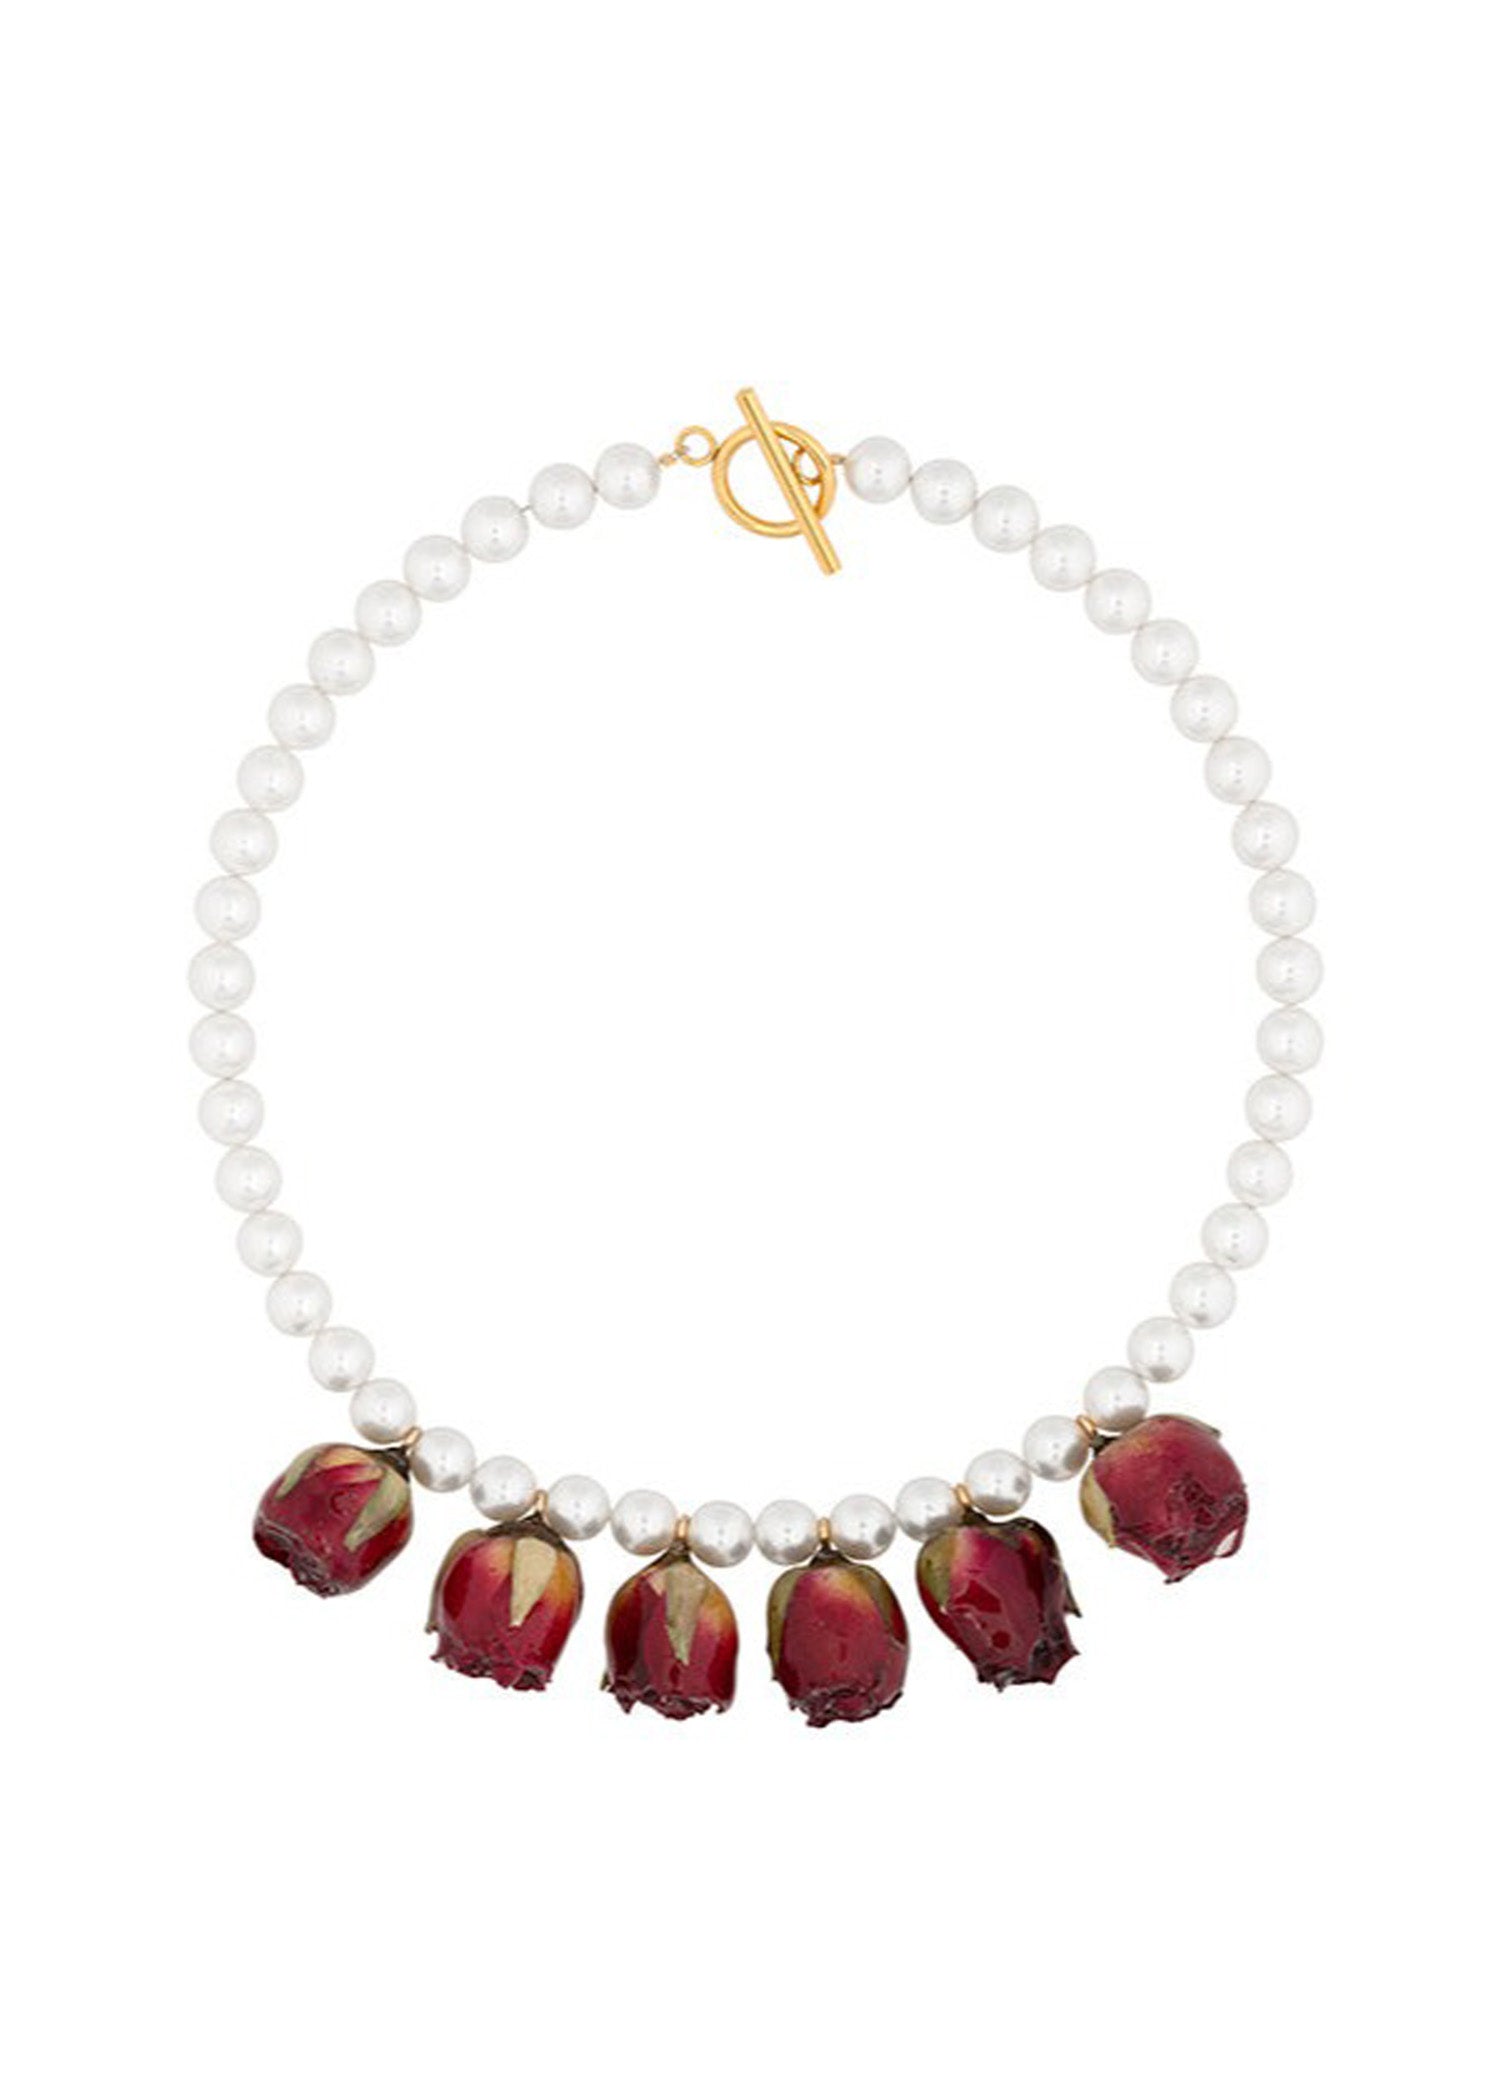 Glass Swarovski pearl and vampire rosebud single-strand necklace with gold toggle clasp.